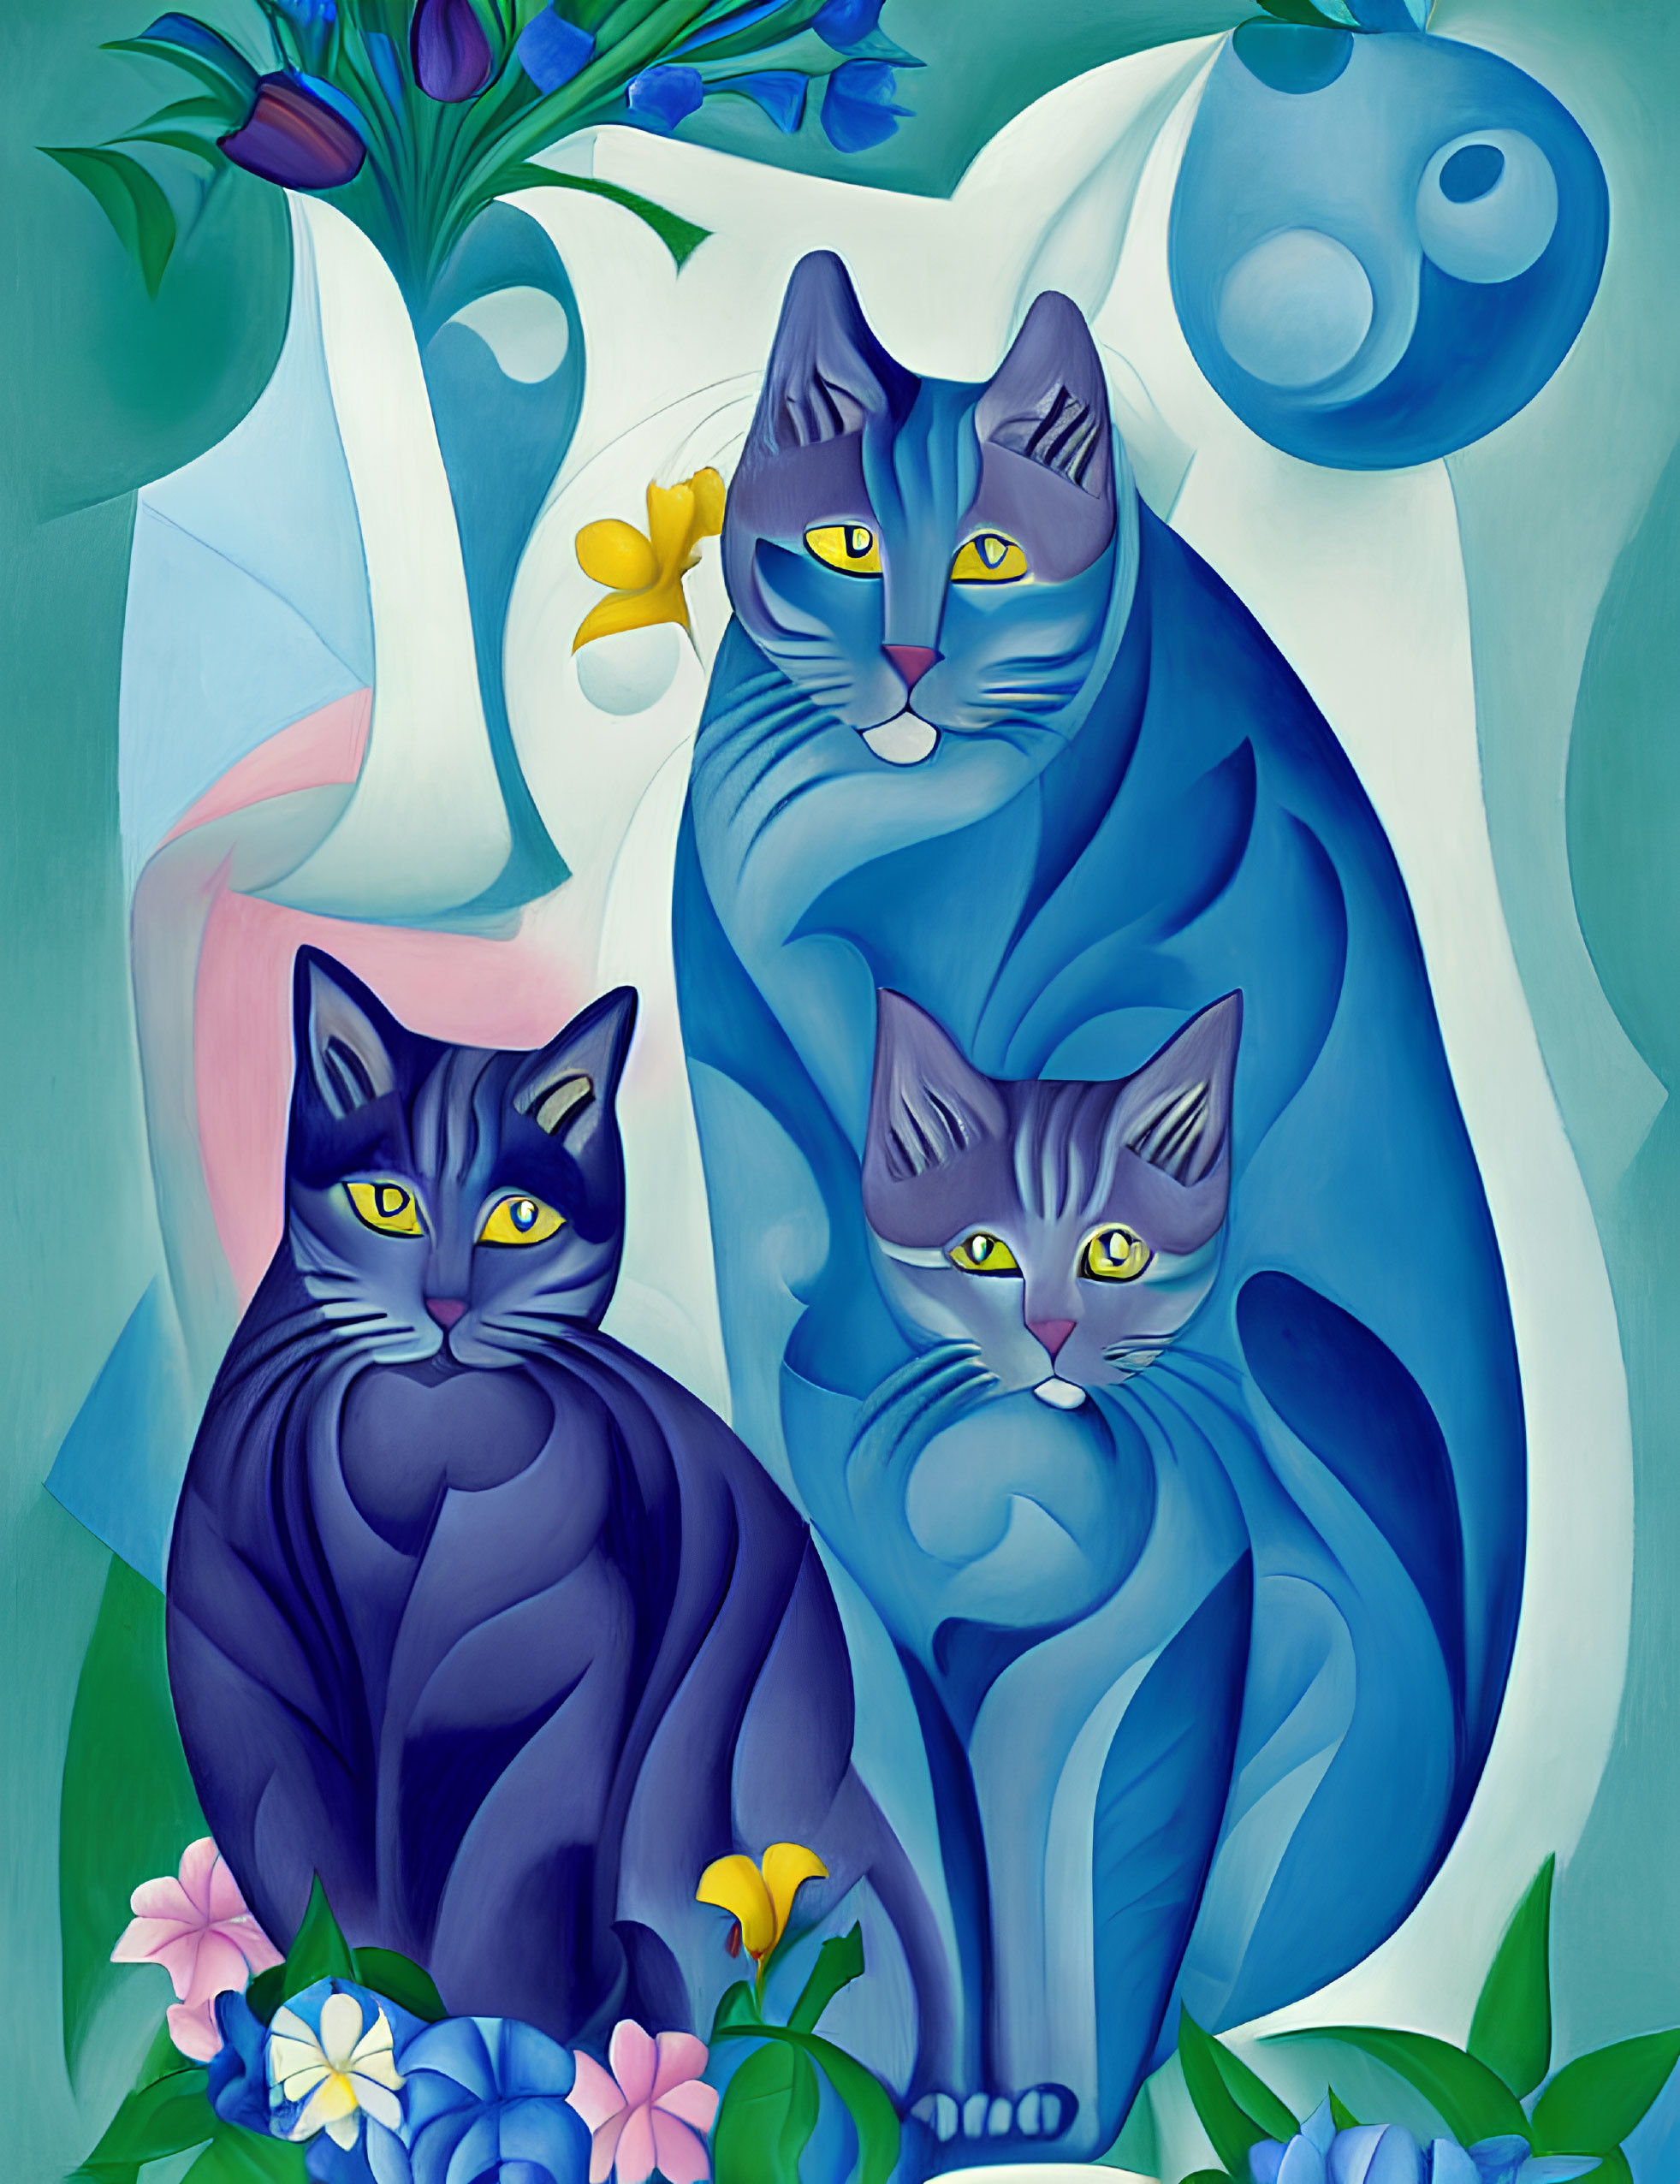 Abstract Blue and Green Cats with Floral Elements